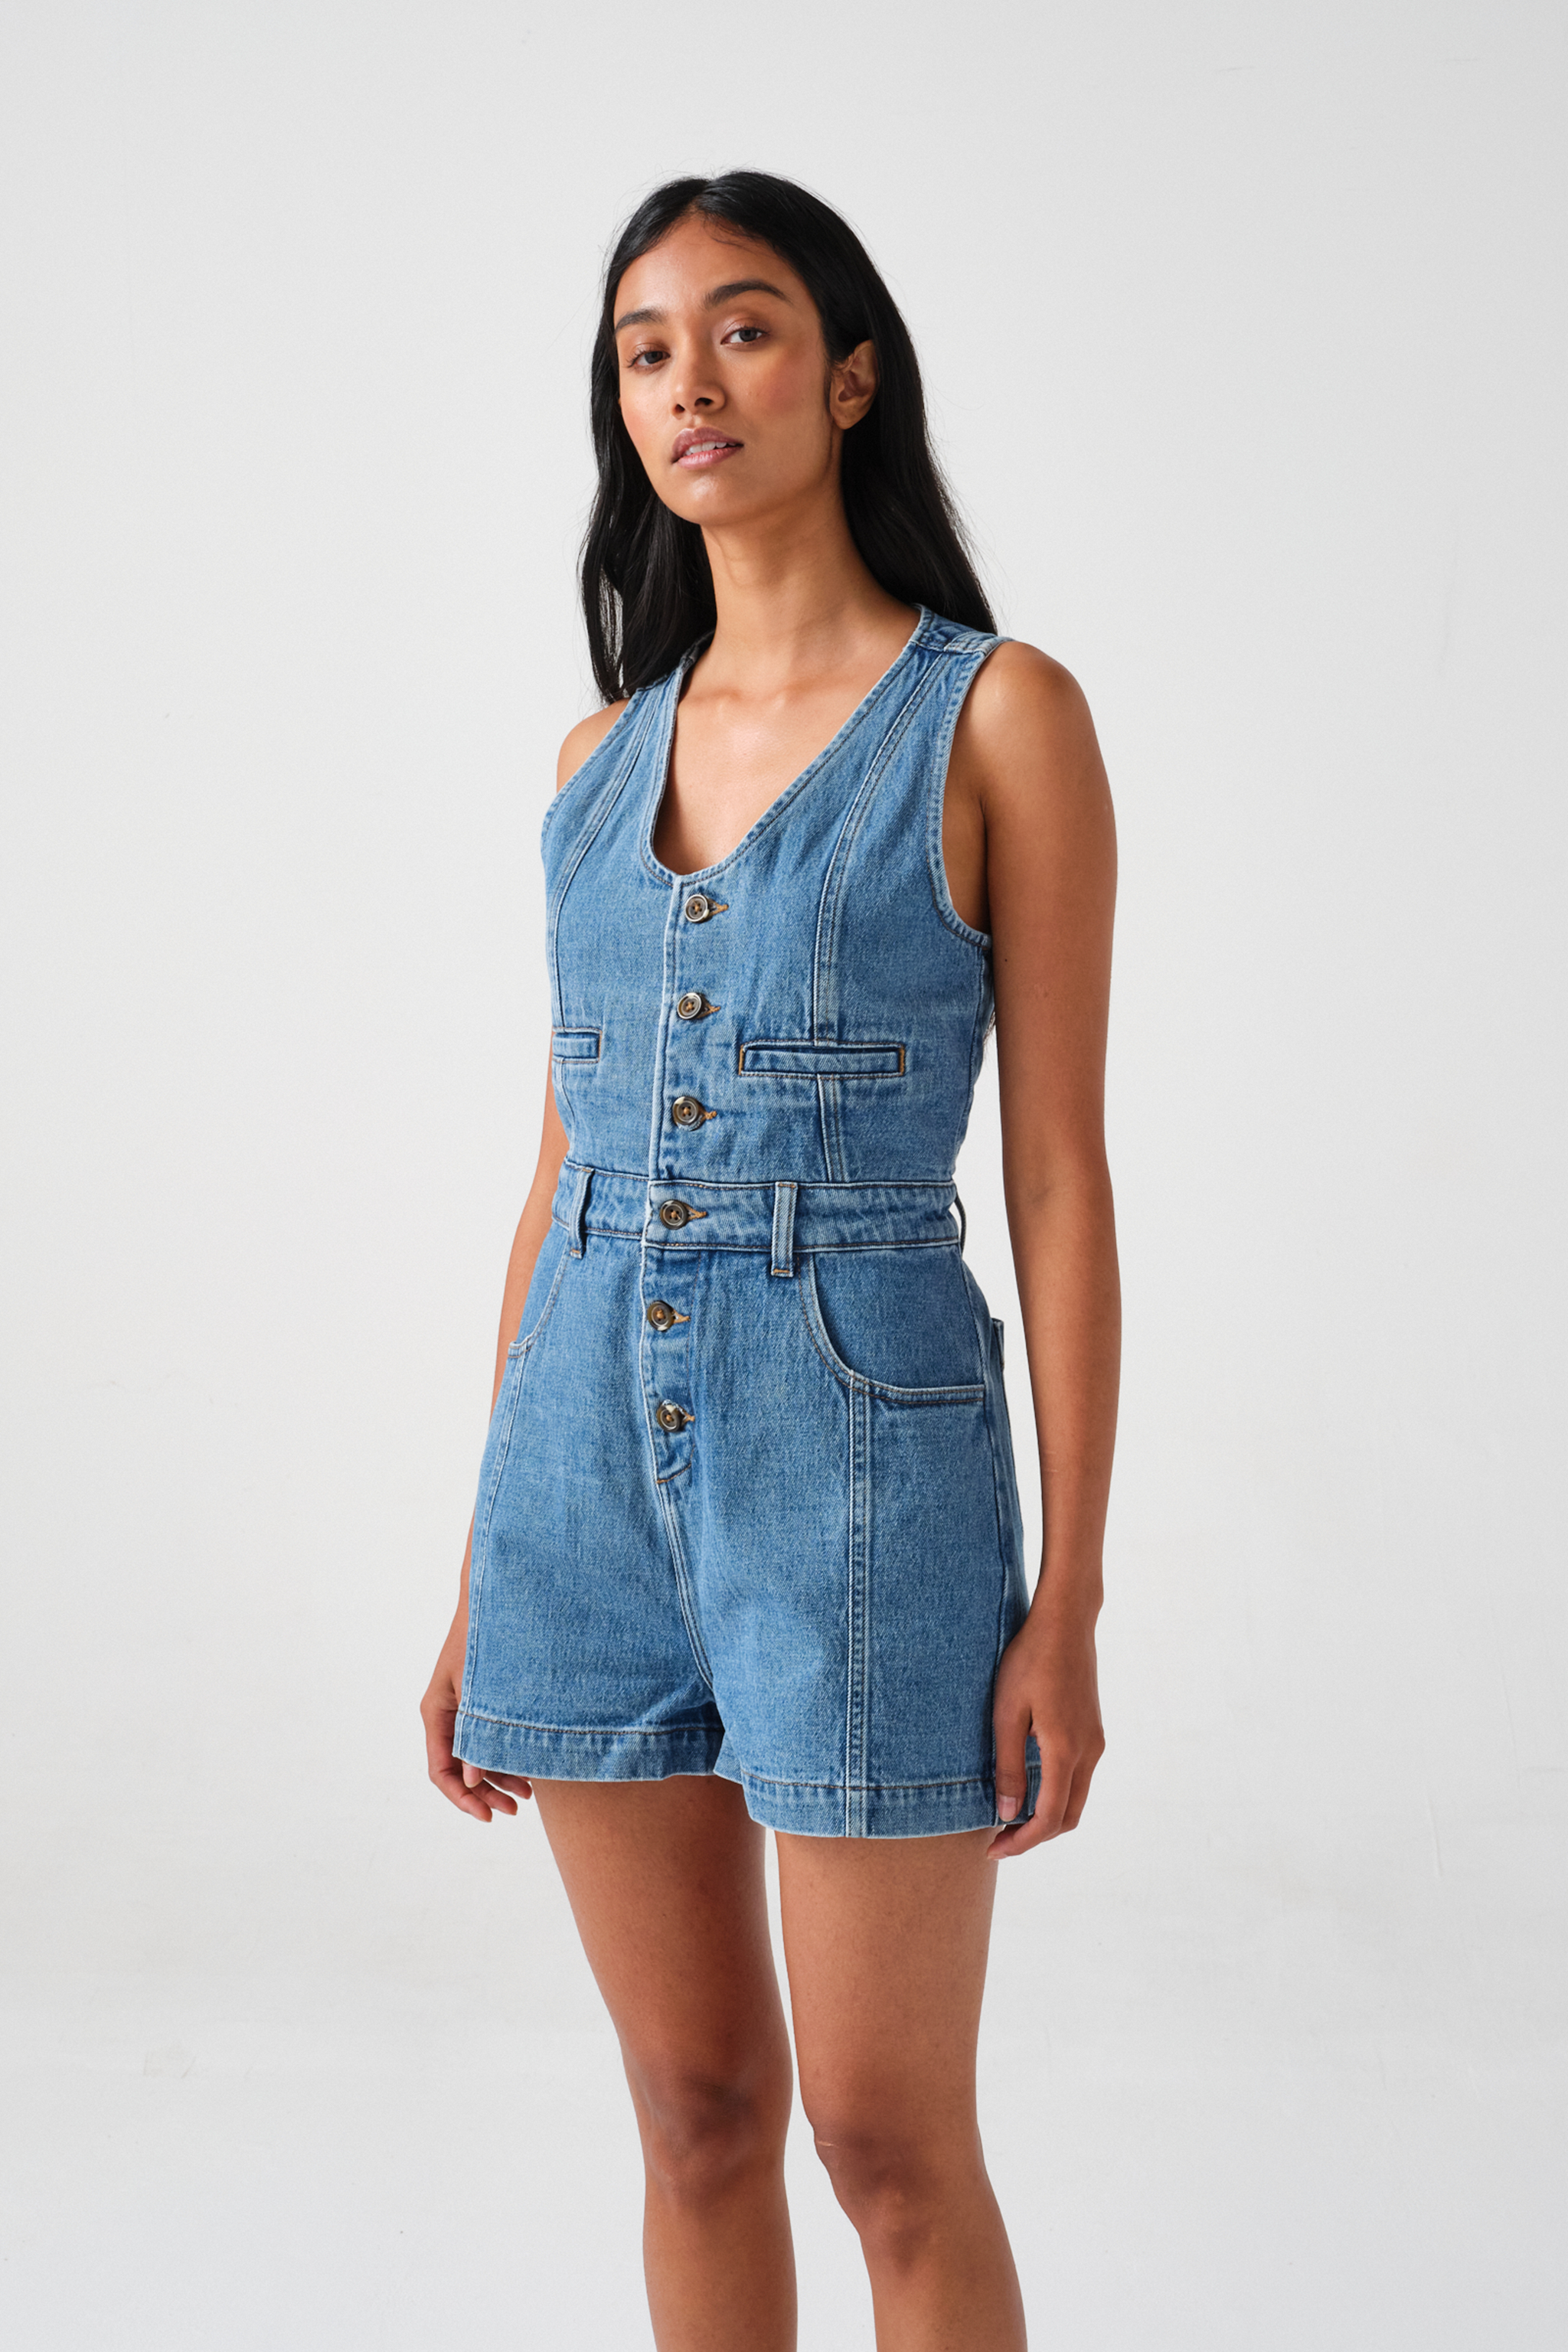 Brand New Romper Shorts with pockets